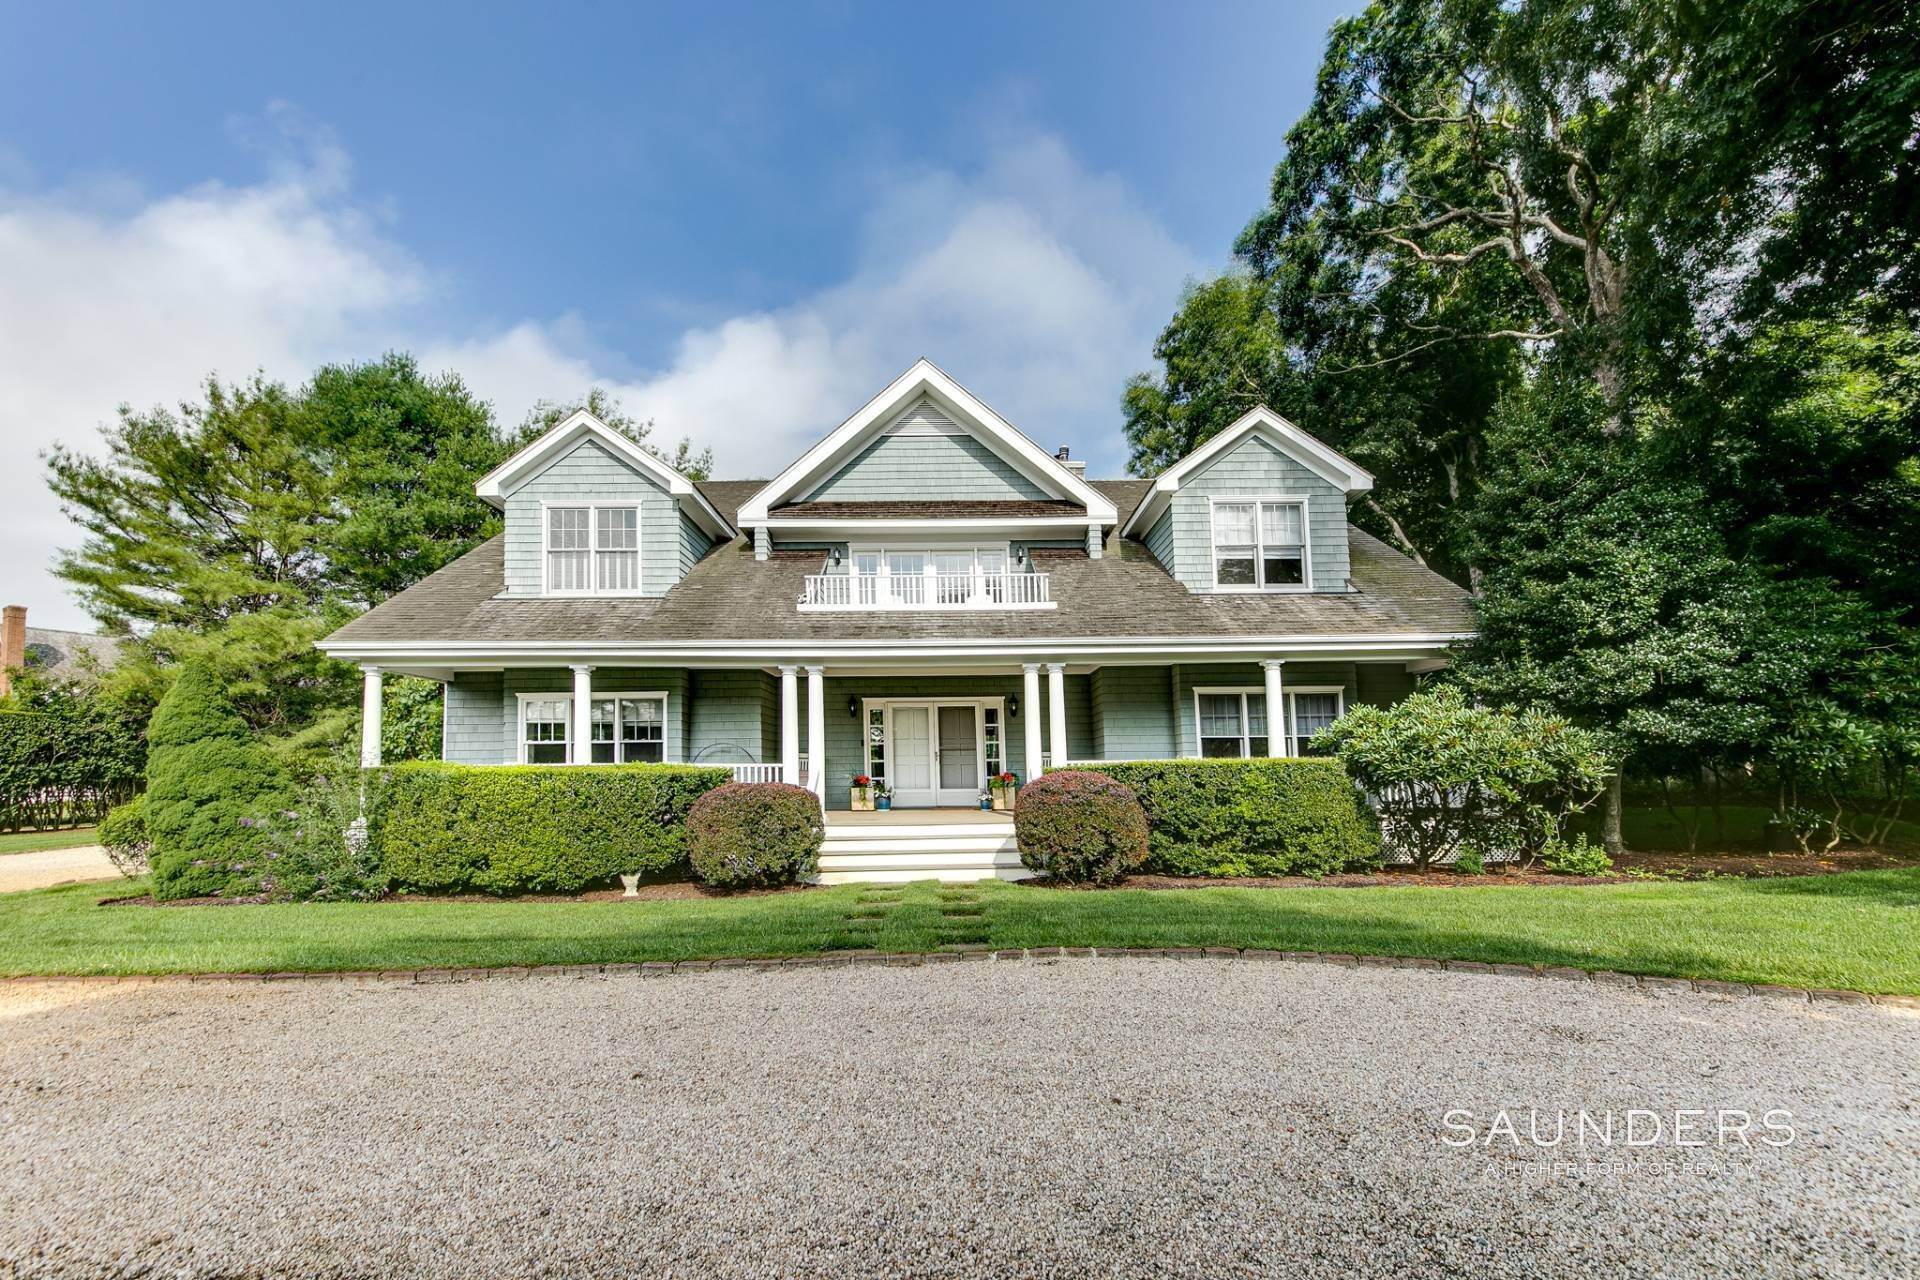 Single Family Homes at Gorgeous Five Bedroom Home Close To Eh Village East Hampton North, East Hampton, NY 11937